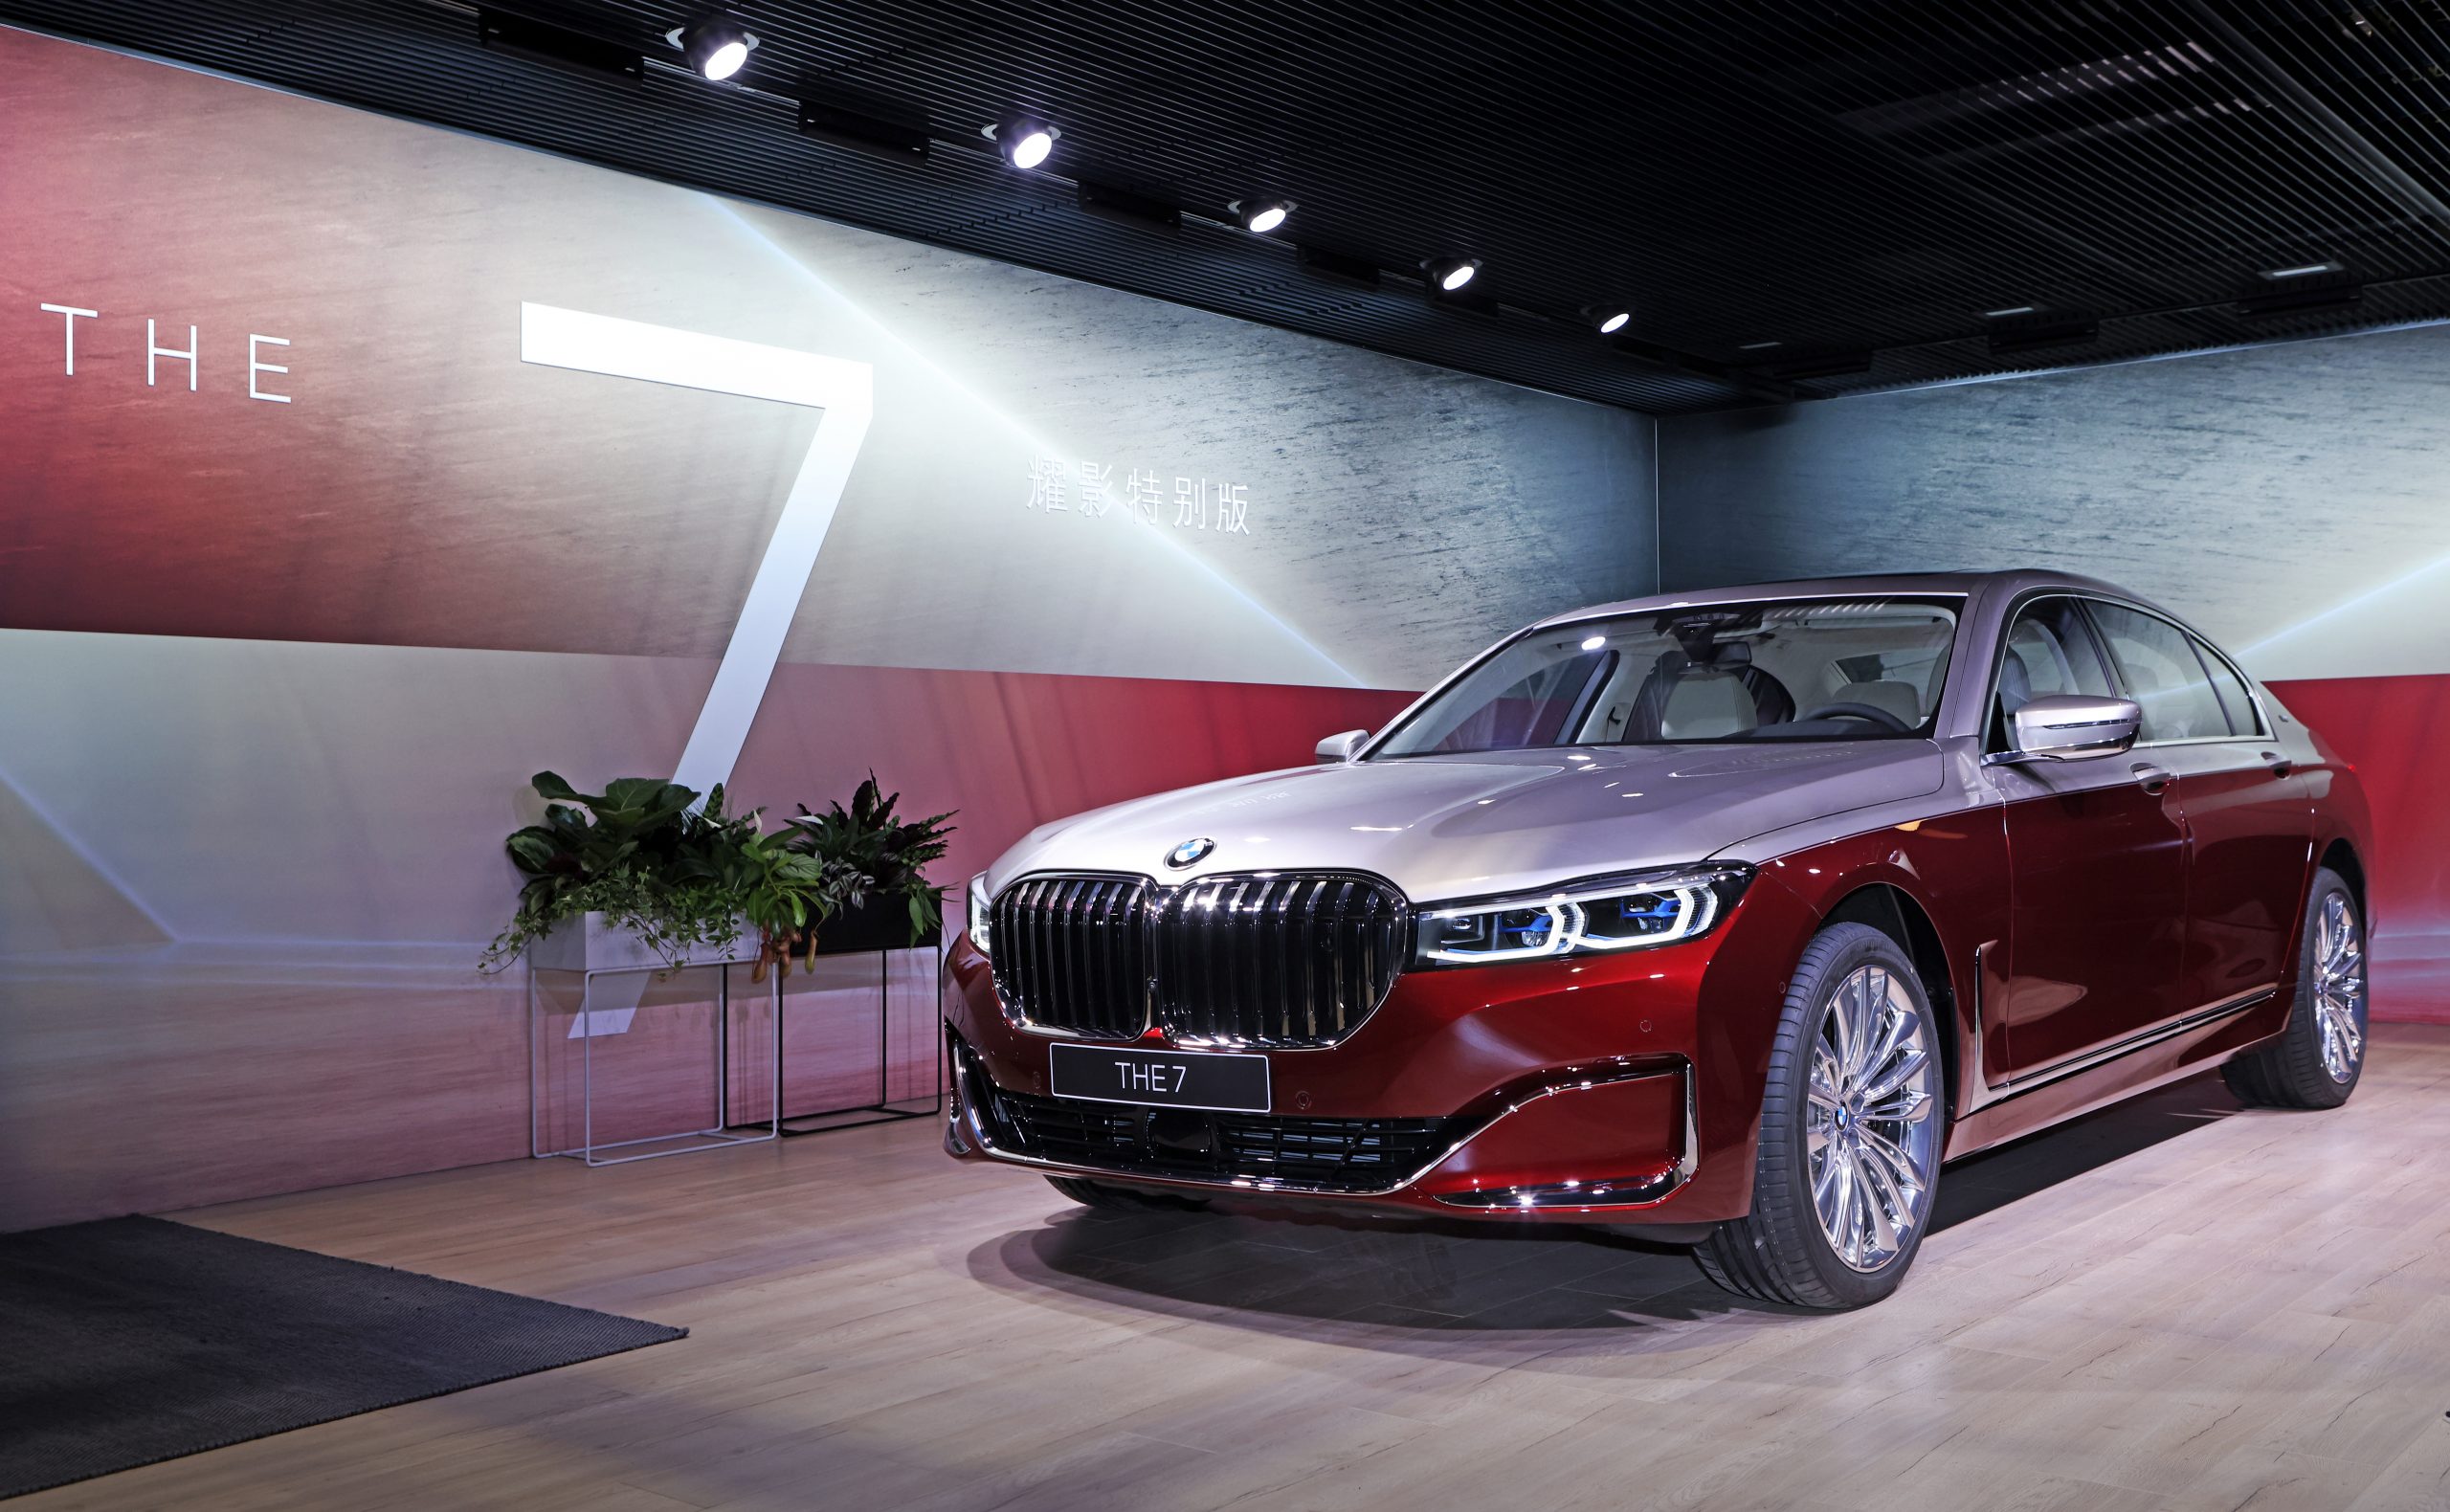 Special Edition, Two-Tone BMW 7 Series arrives in China